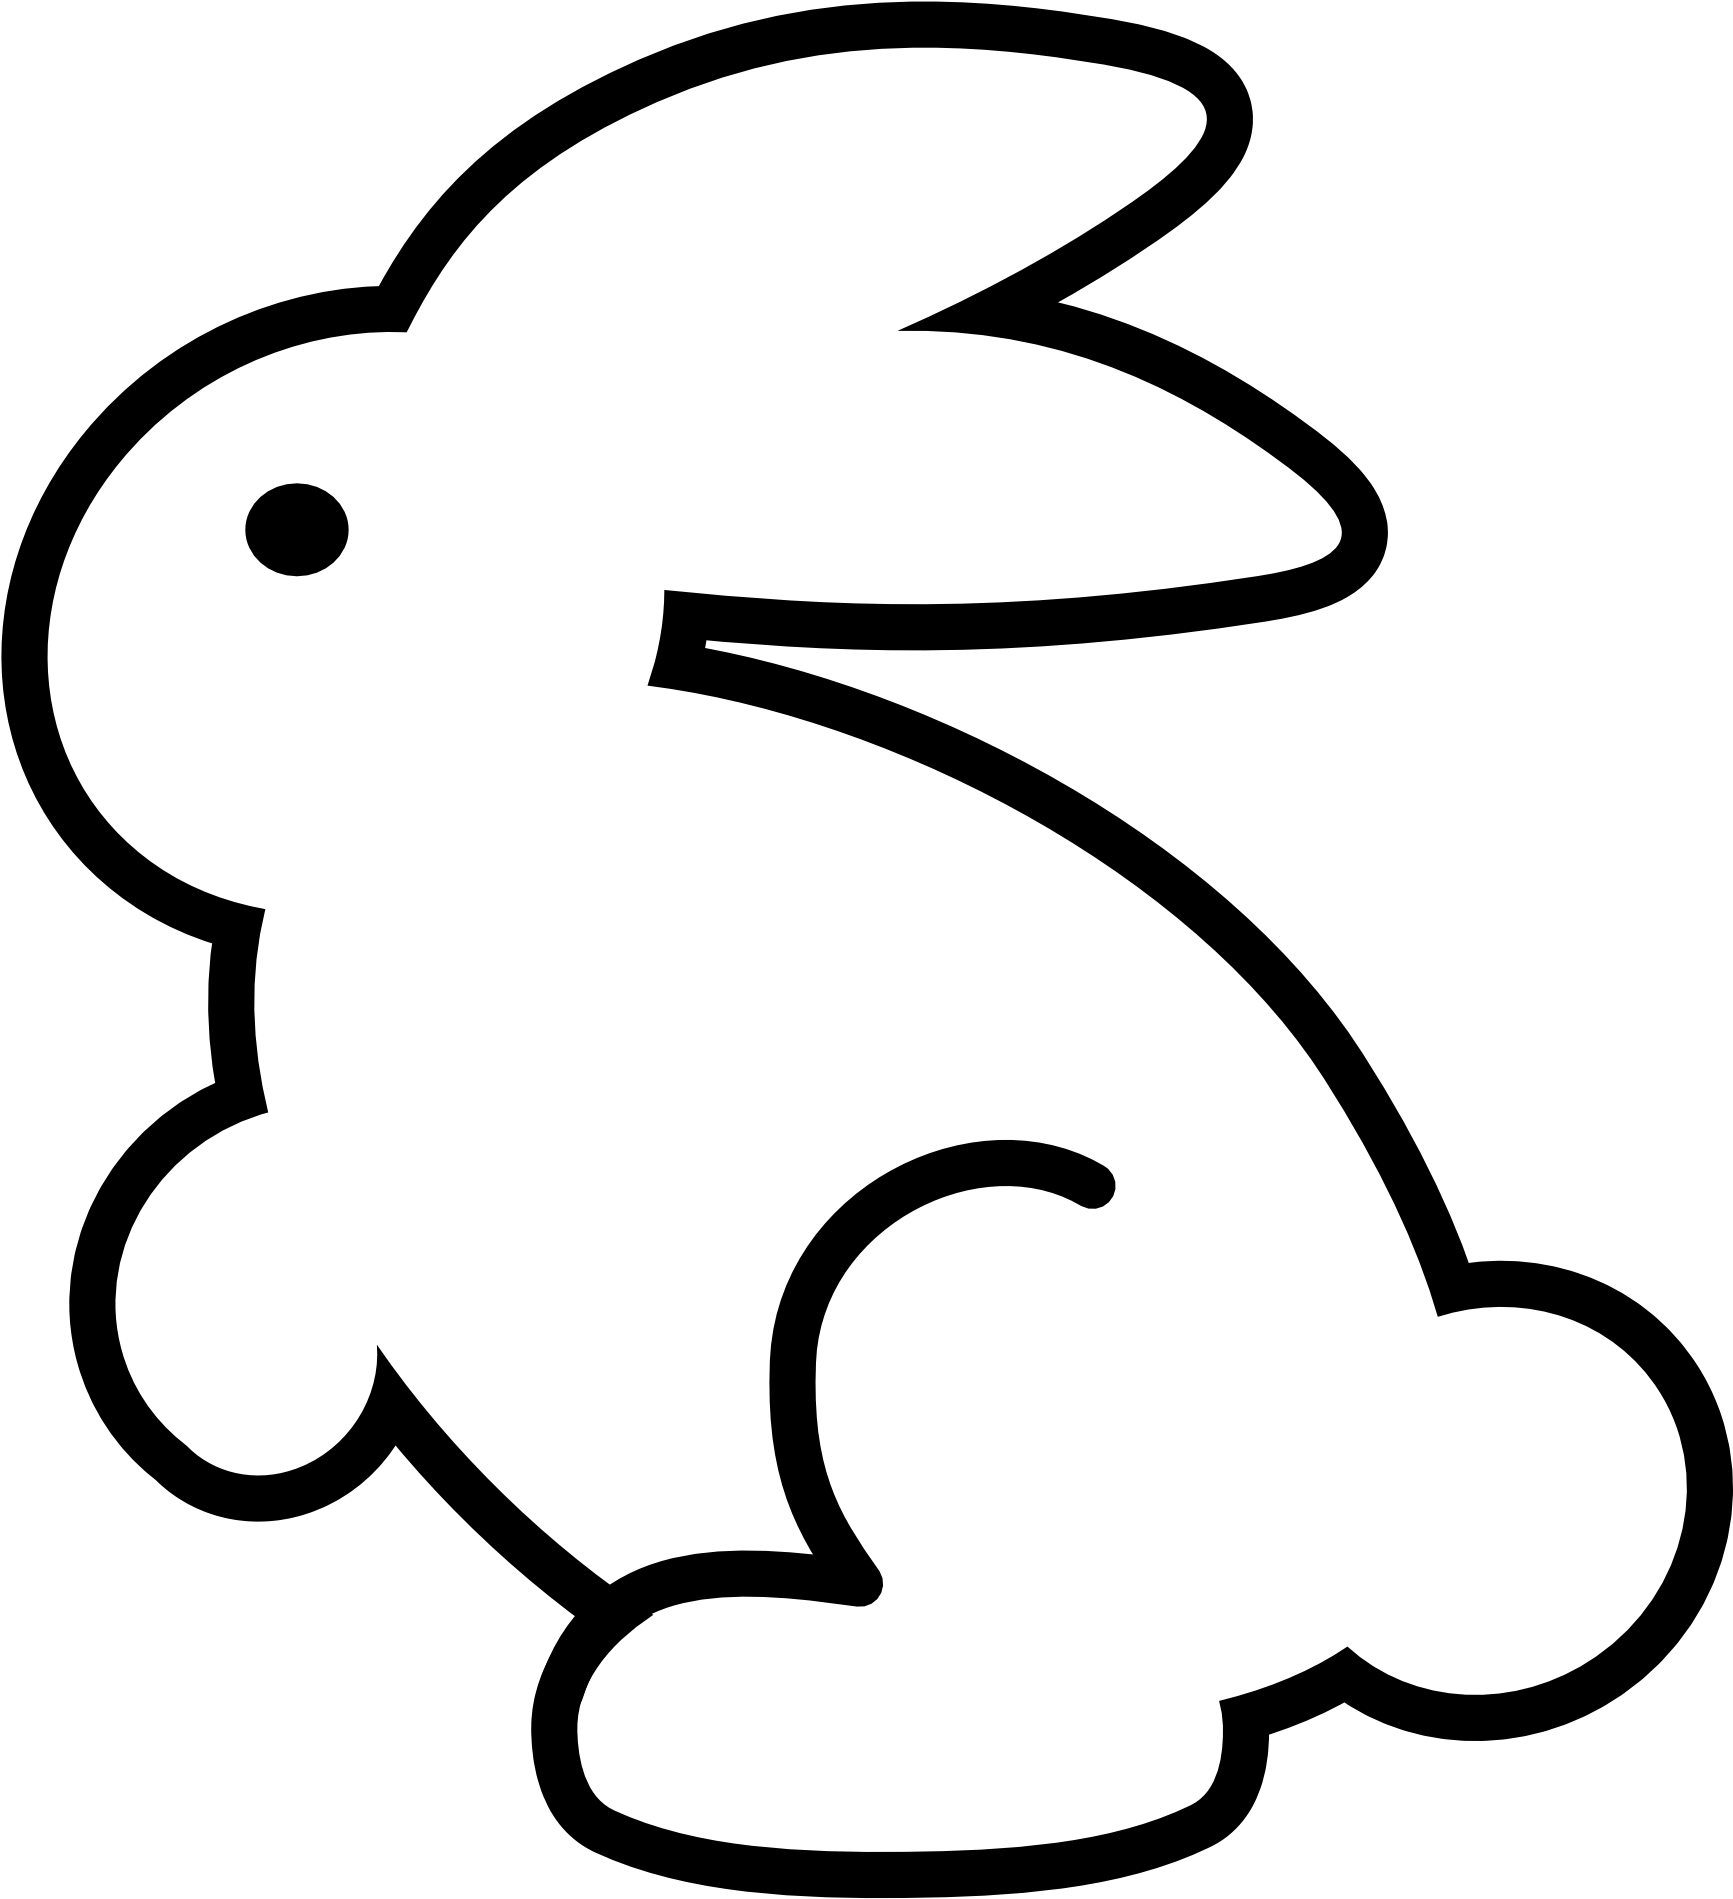 Black And White Clipart Bugs Bunny Vector Cliparts - Best Riddles (1969x1969)